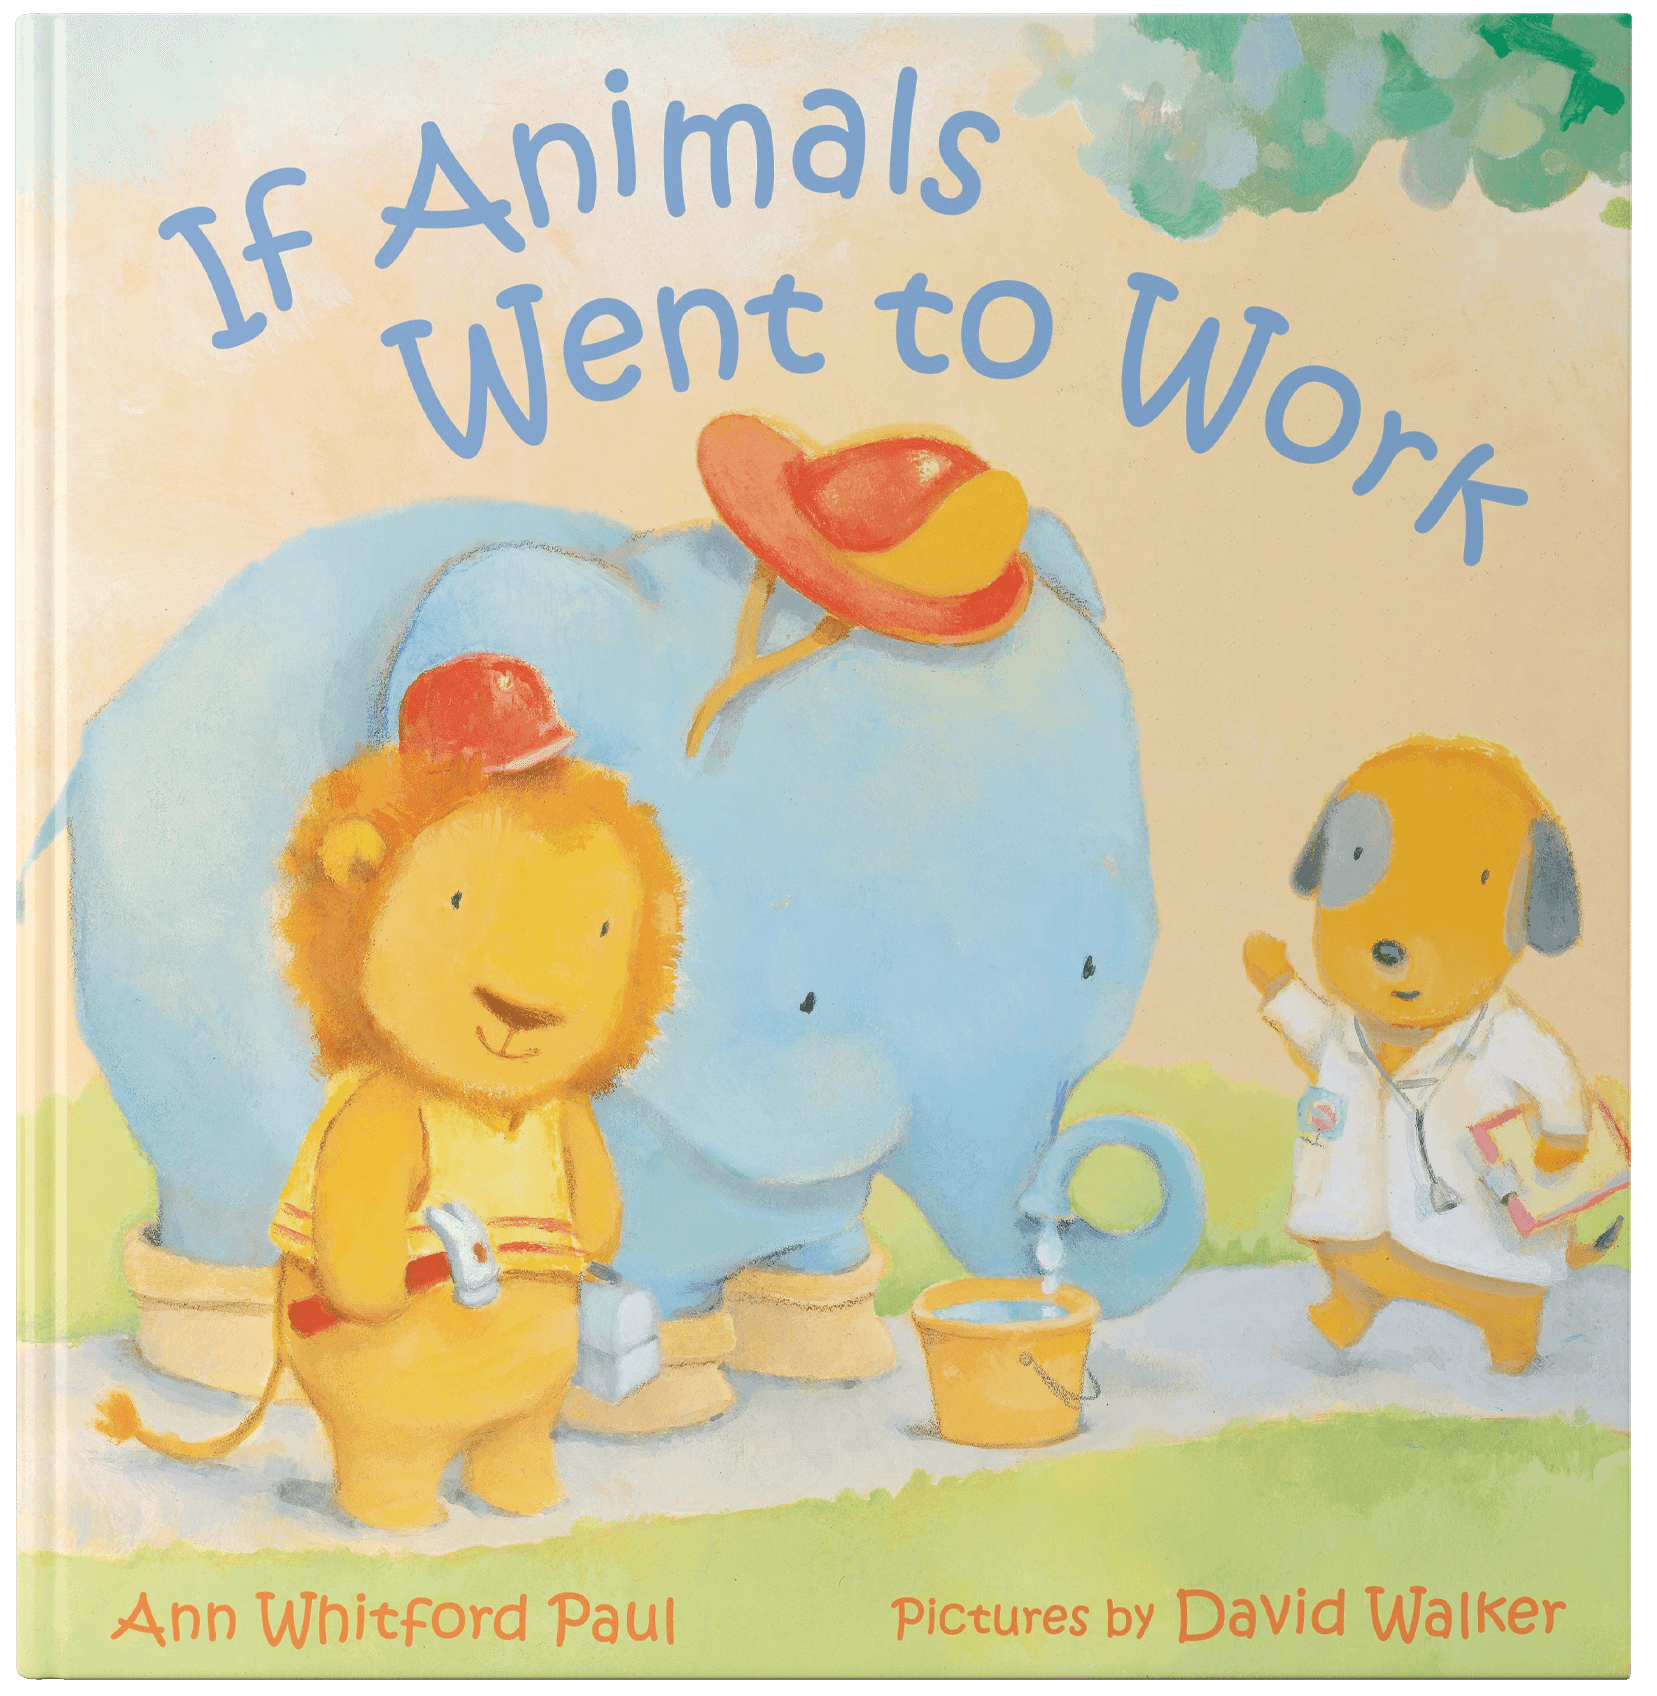 If Animals Went to School by Ann Whitford Paul